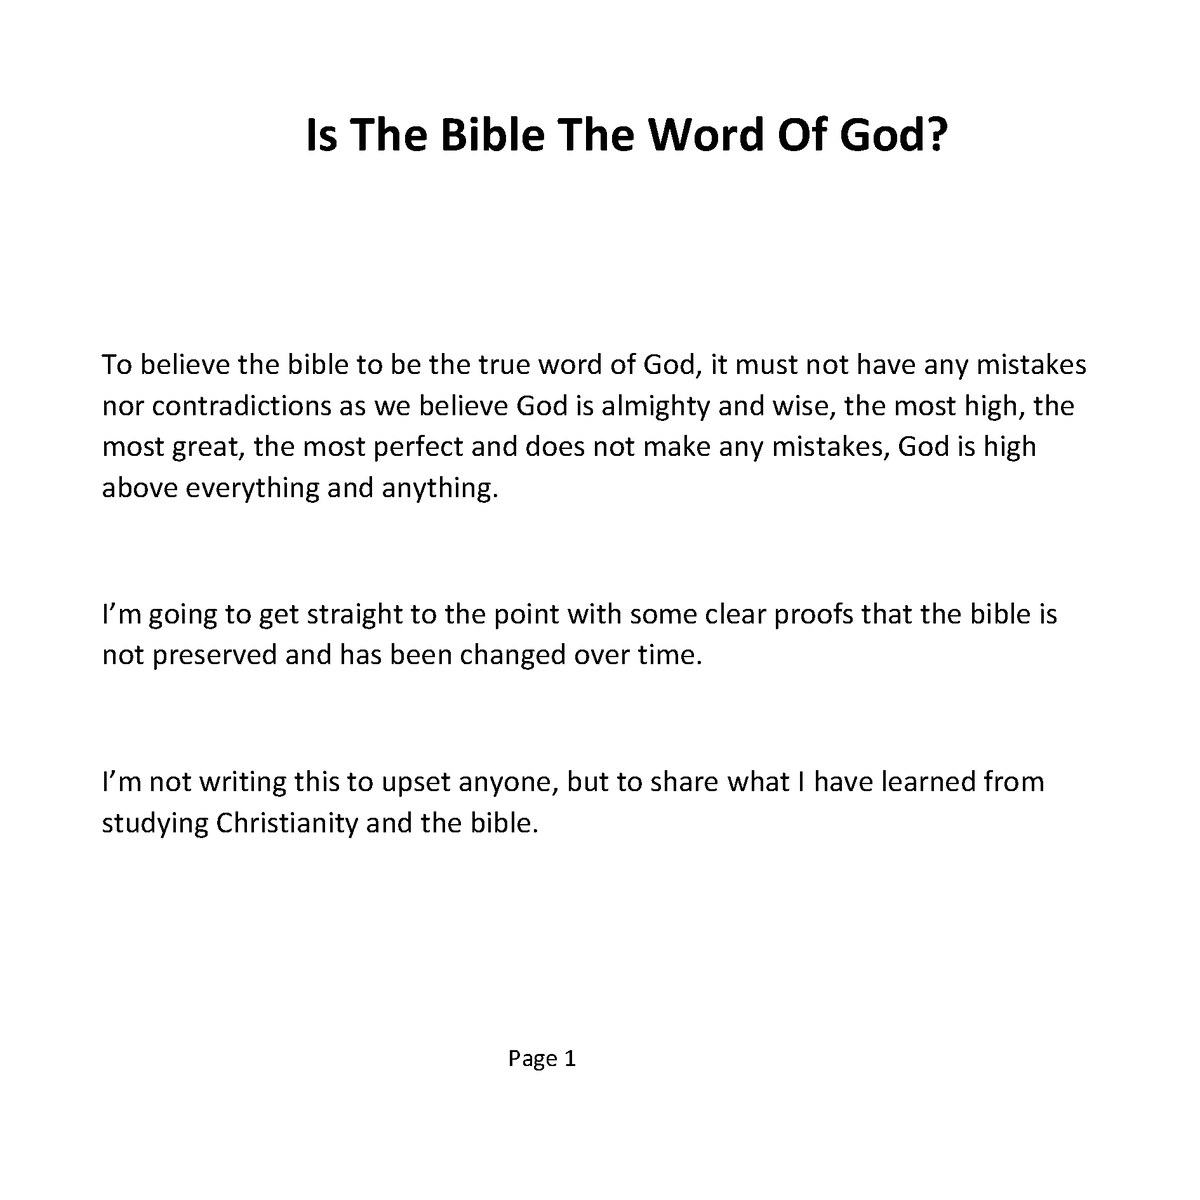 is-the-bible-the-word-of-god-by-hussein-is-the-bible-the-word-of-god